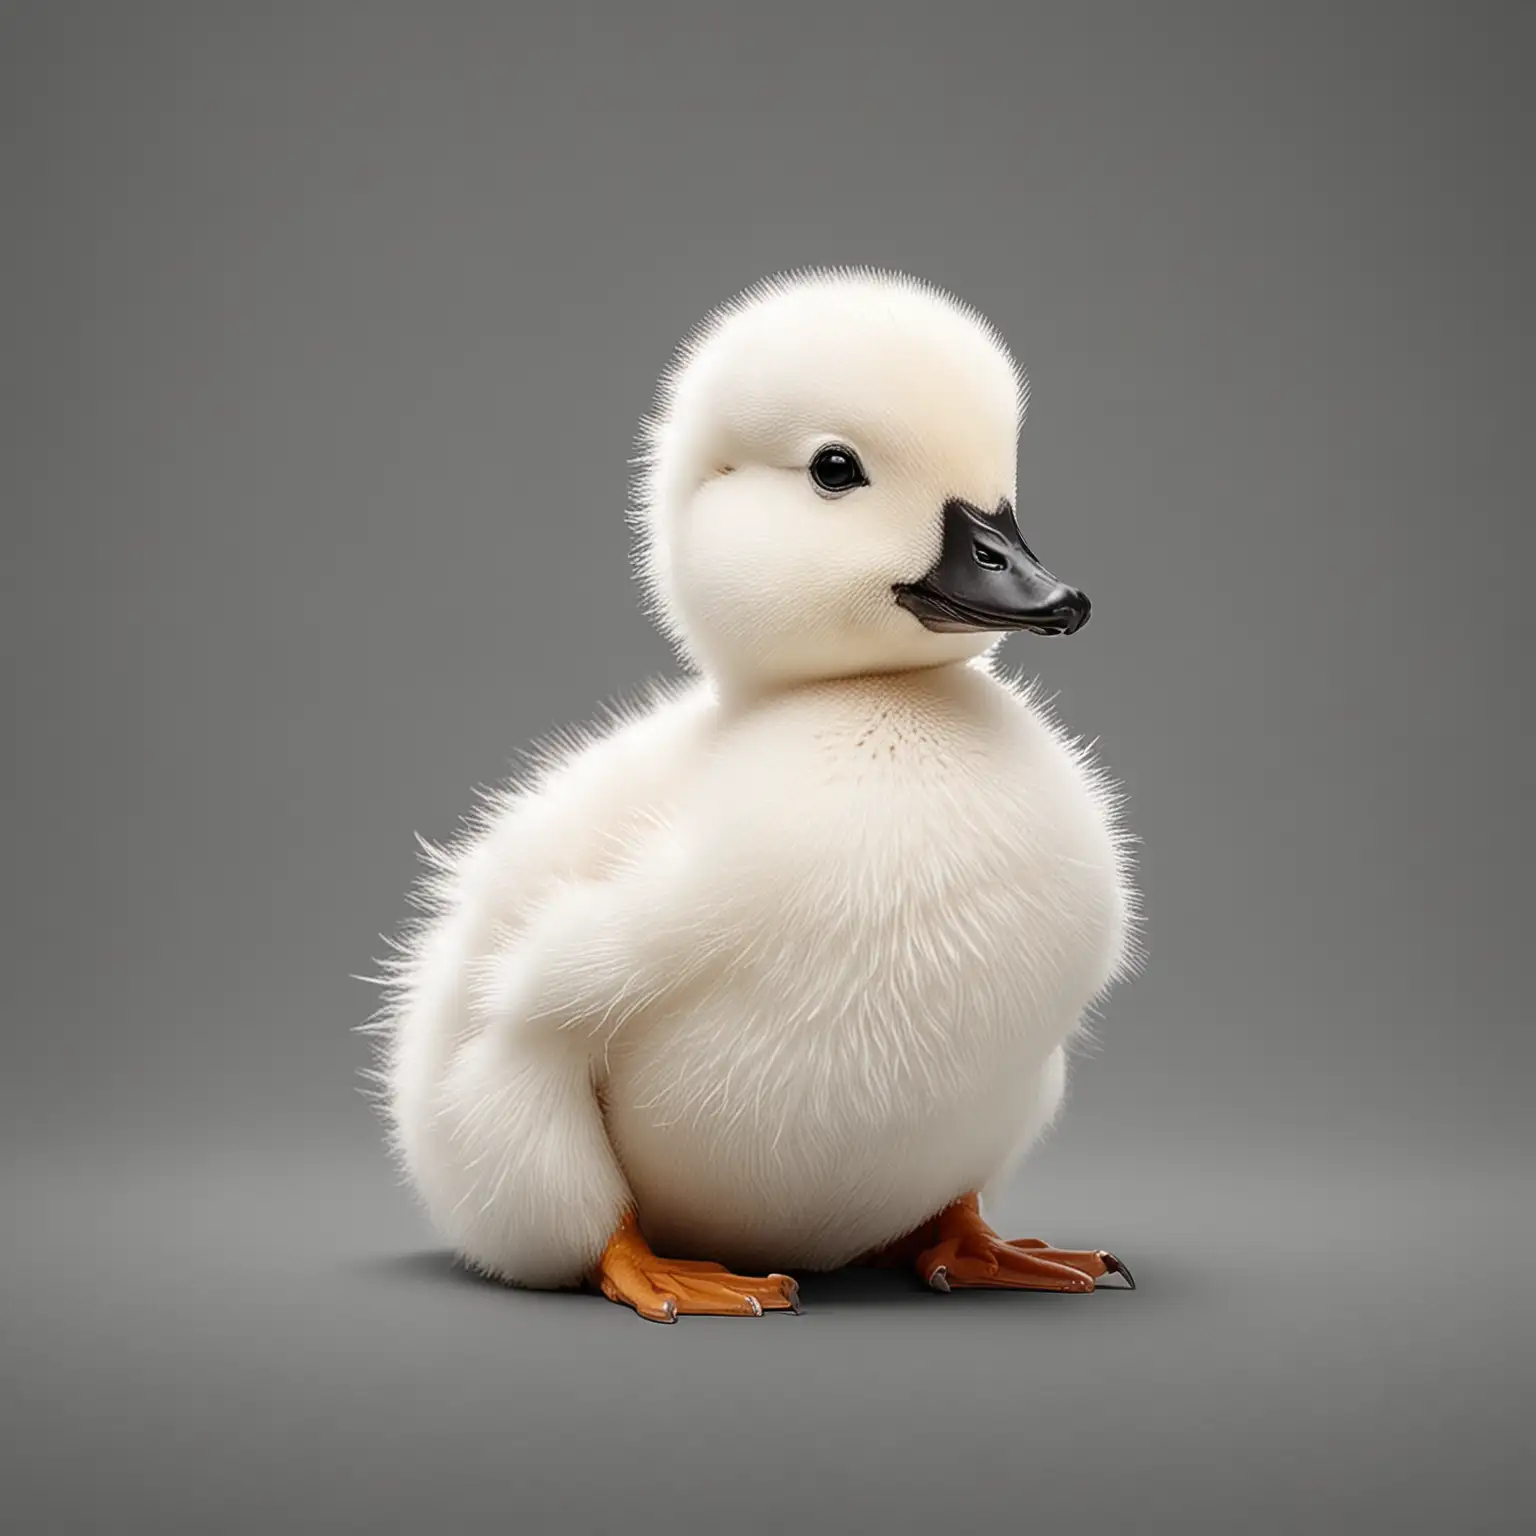 Adorable Chunky White Duckling with Striking Black Outlines